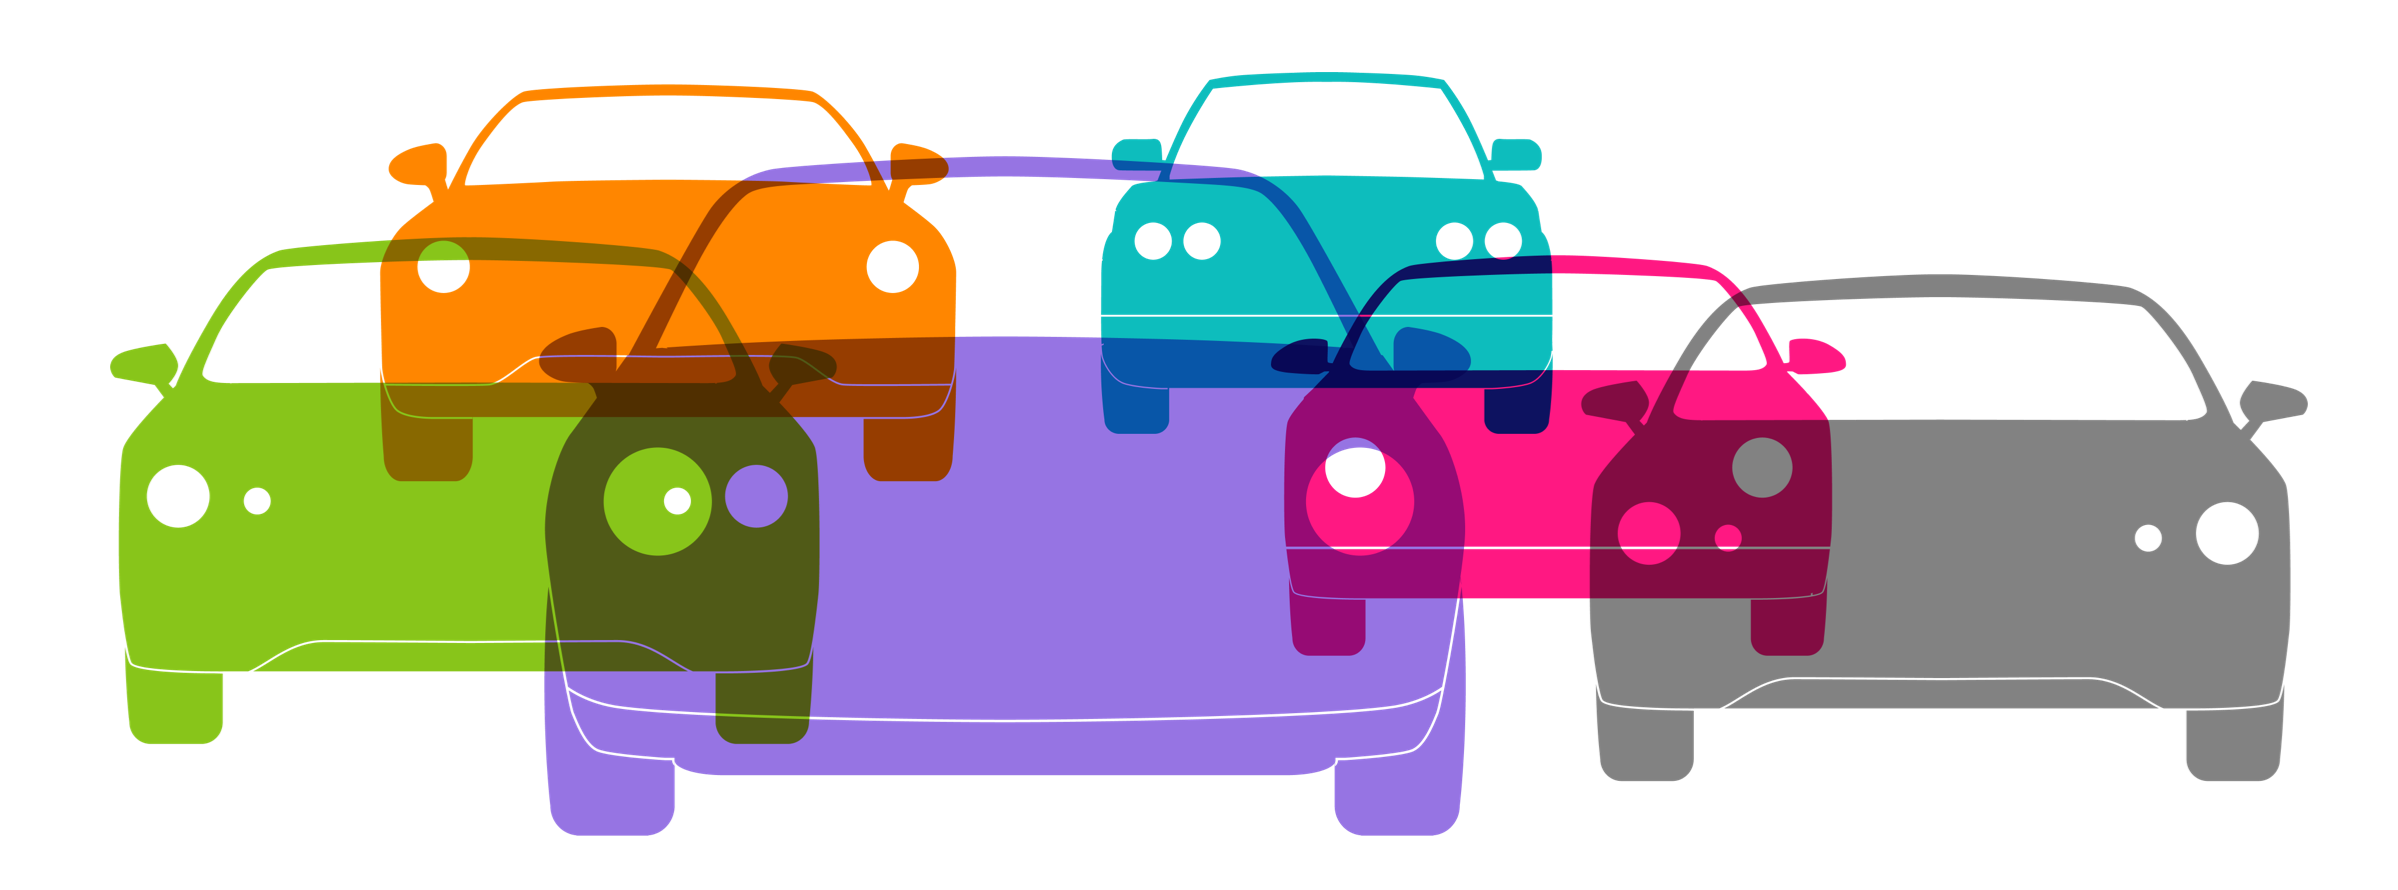 Illustration of colorful cars in traffic.